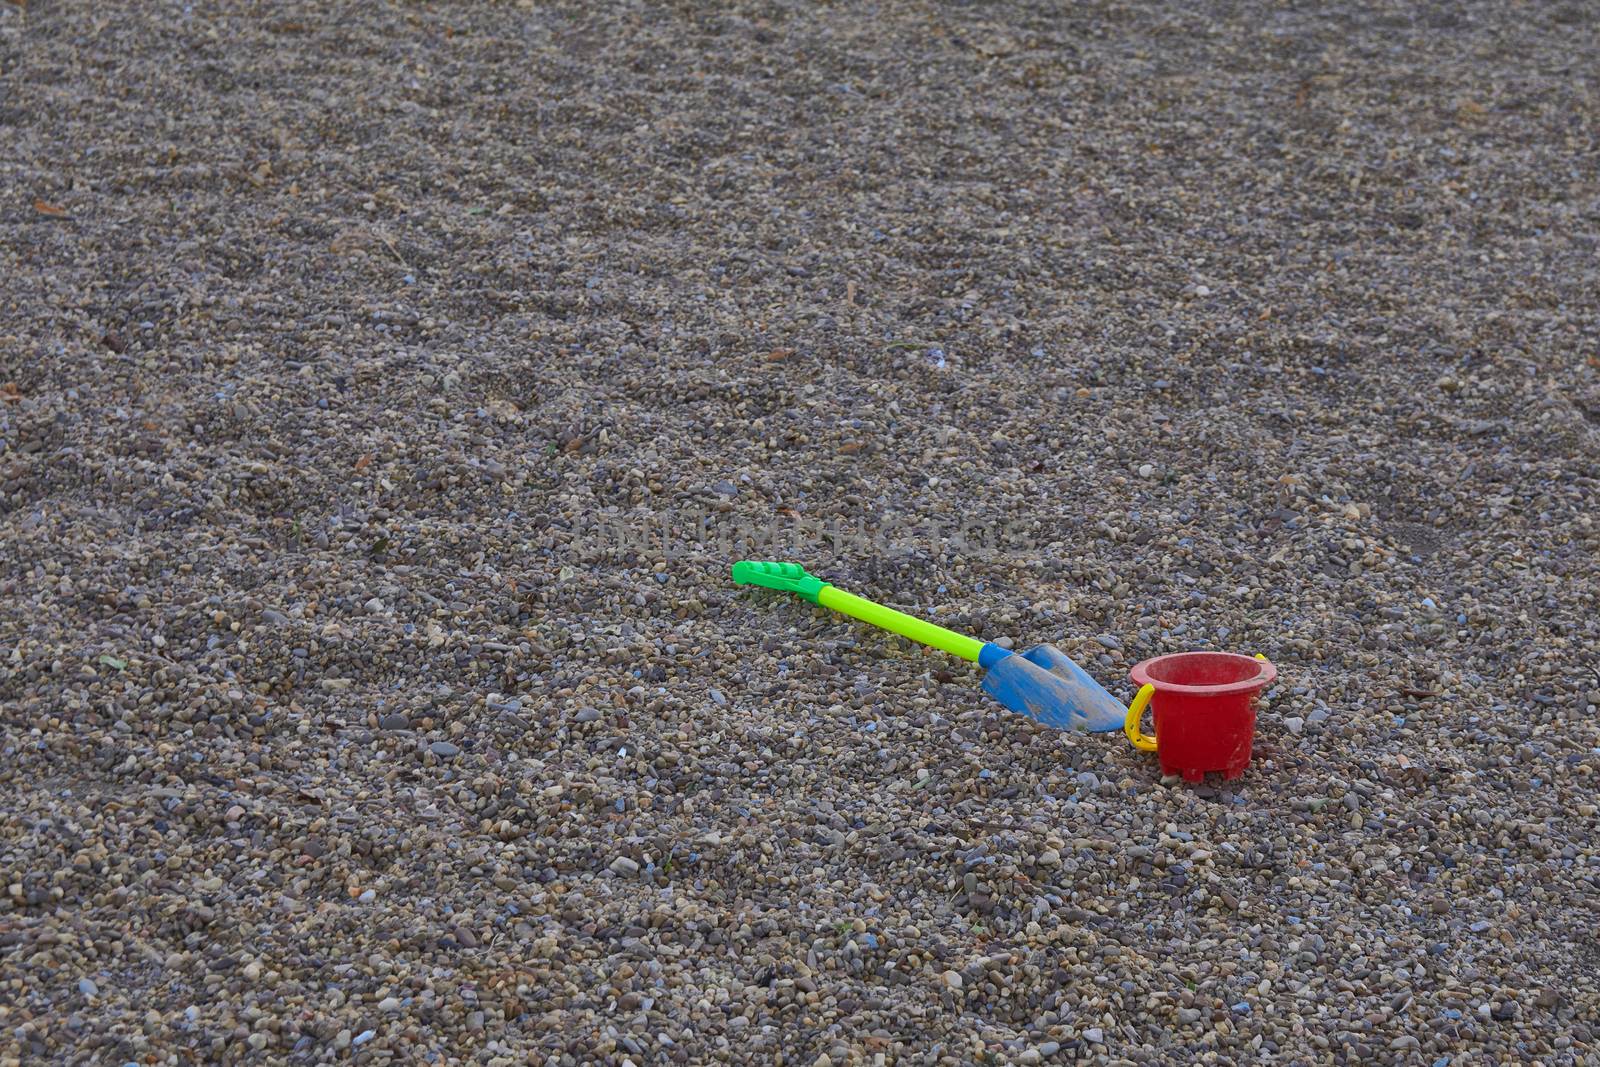 bucket and shovel of children thrown in the stone sand of a park